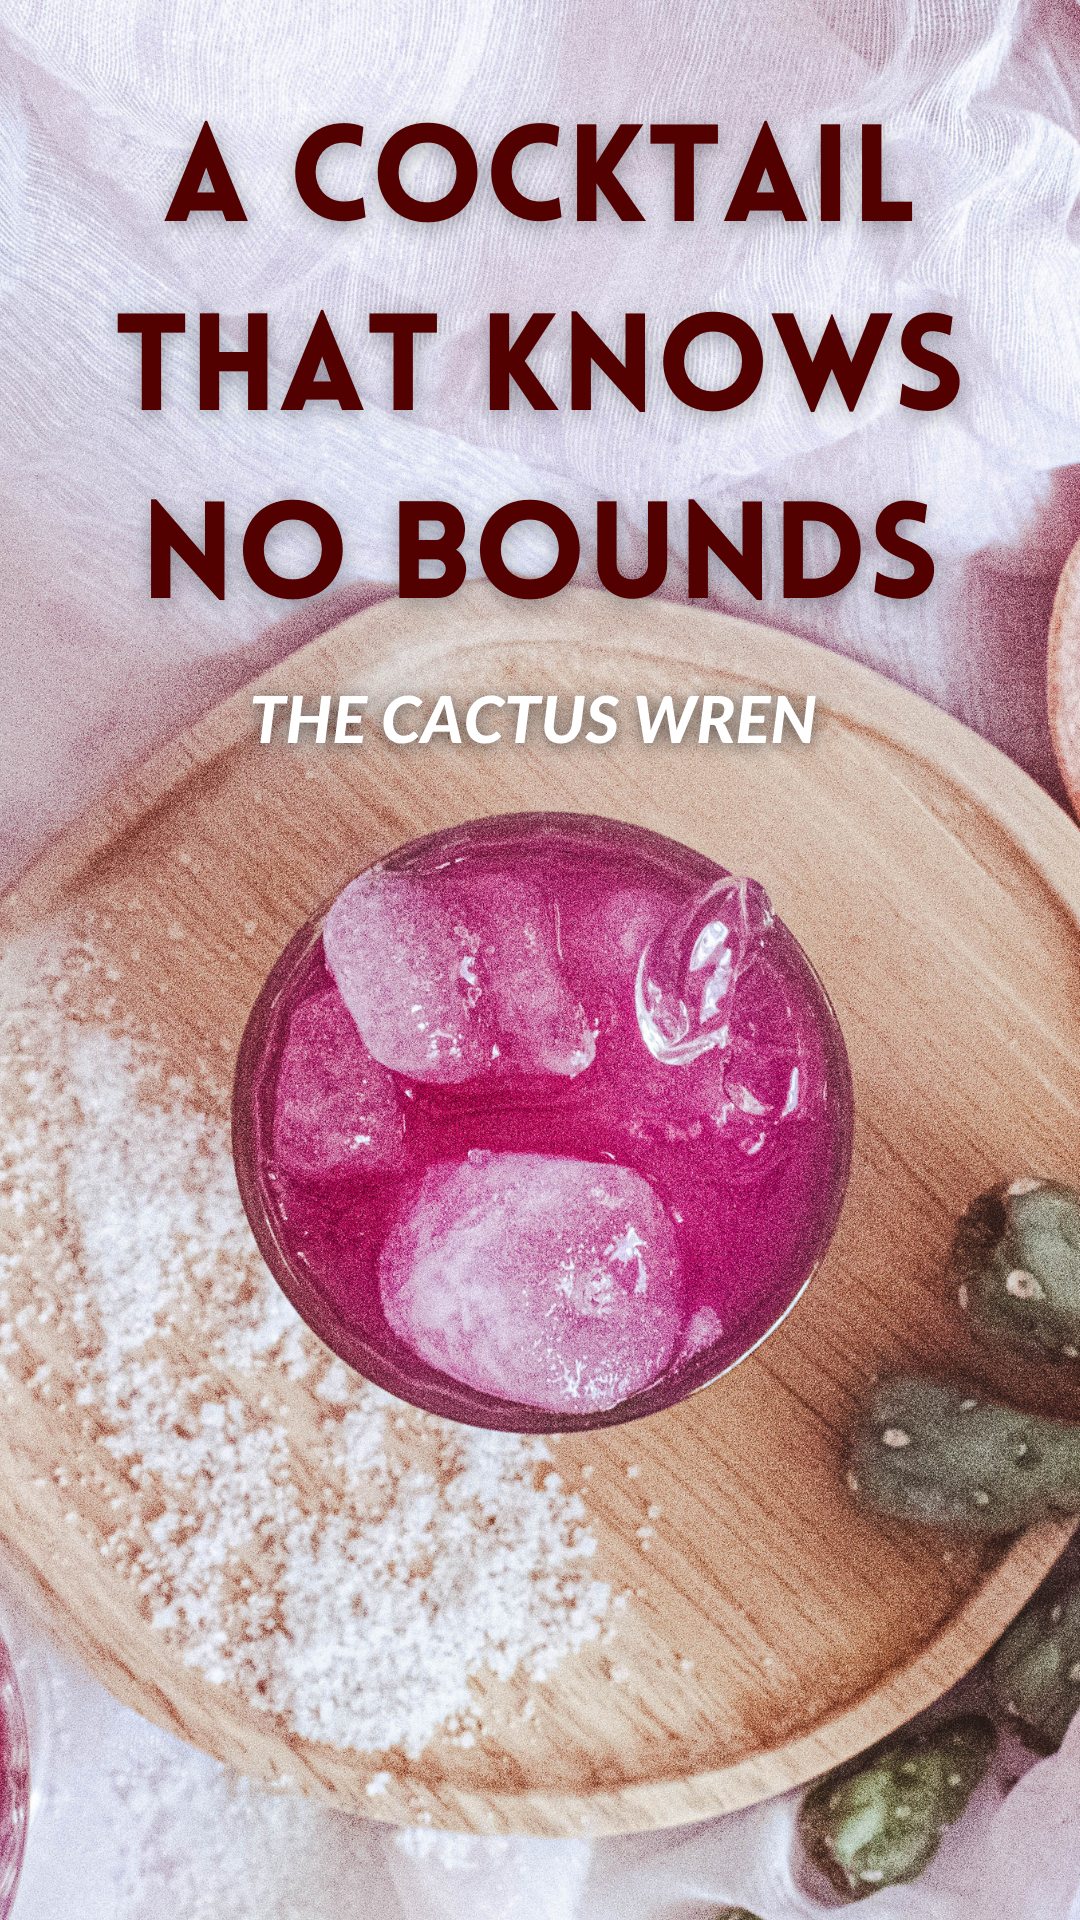 A Cocktail That Knows No Bounds: How to Make the Cactus Wren Your Own.